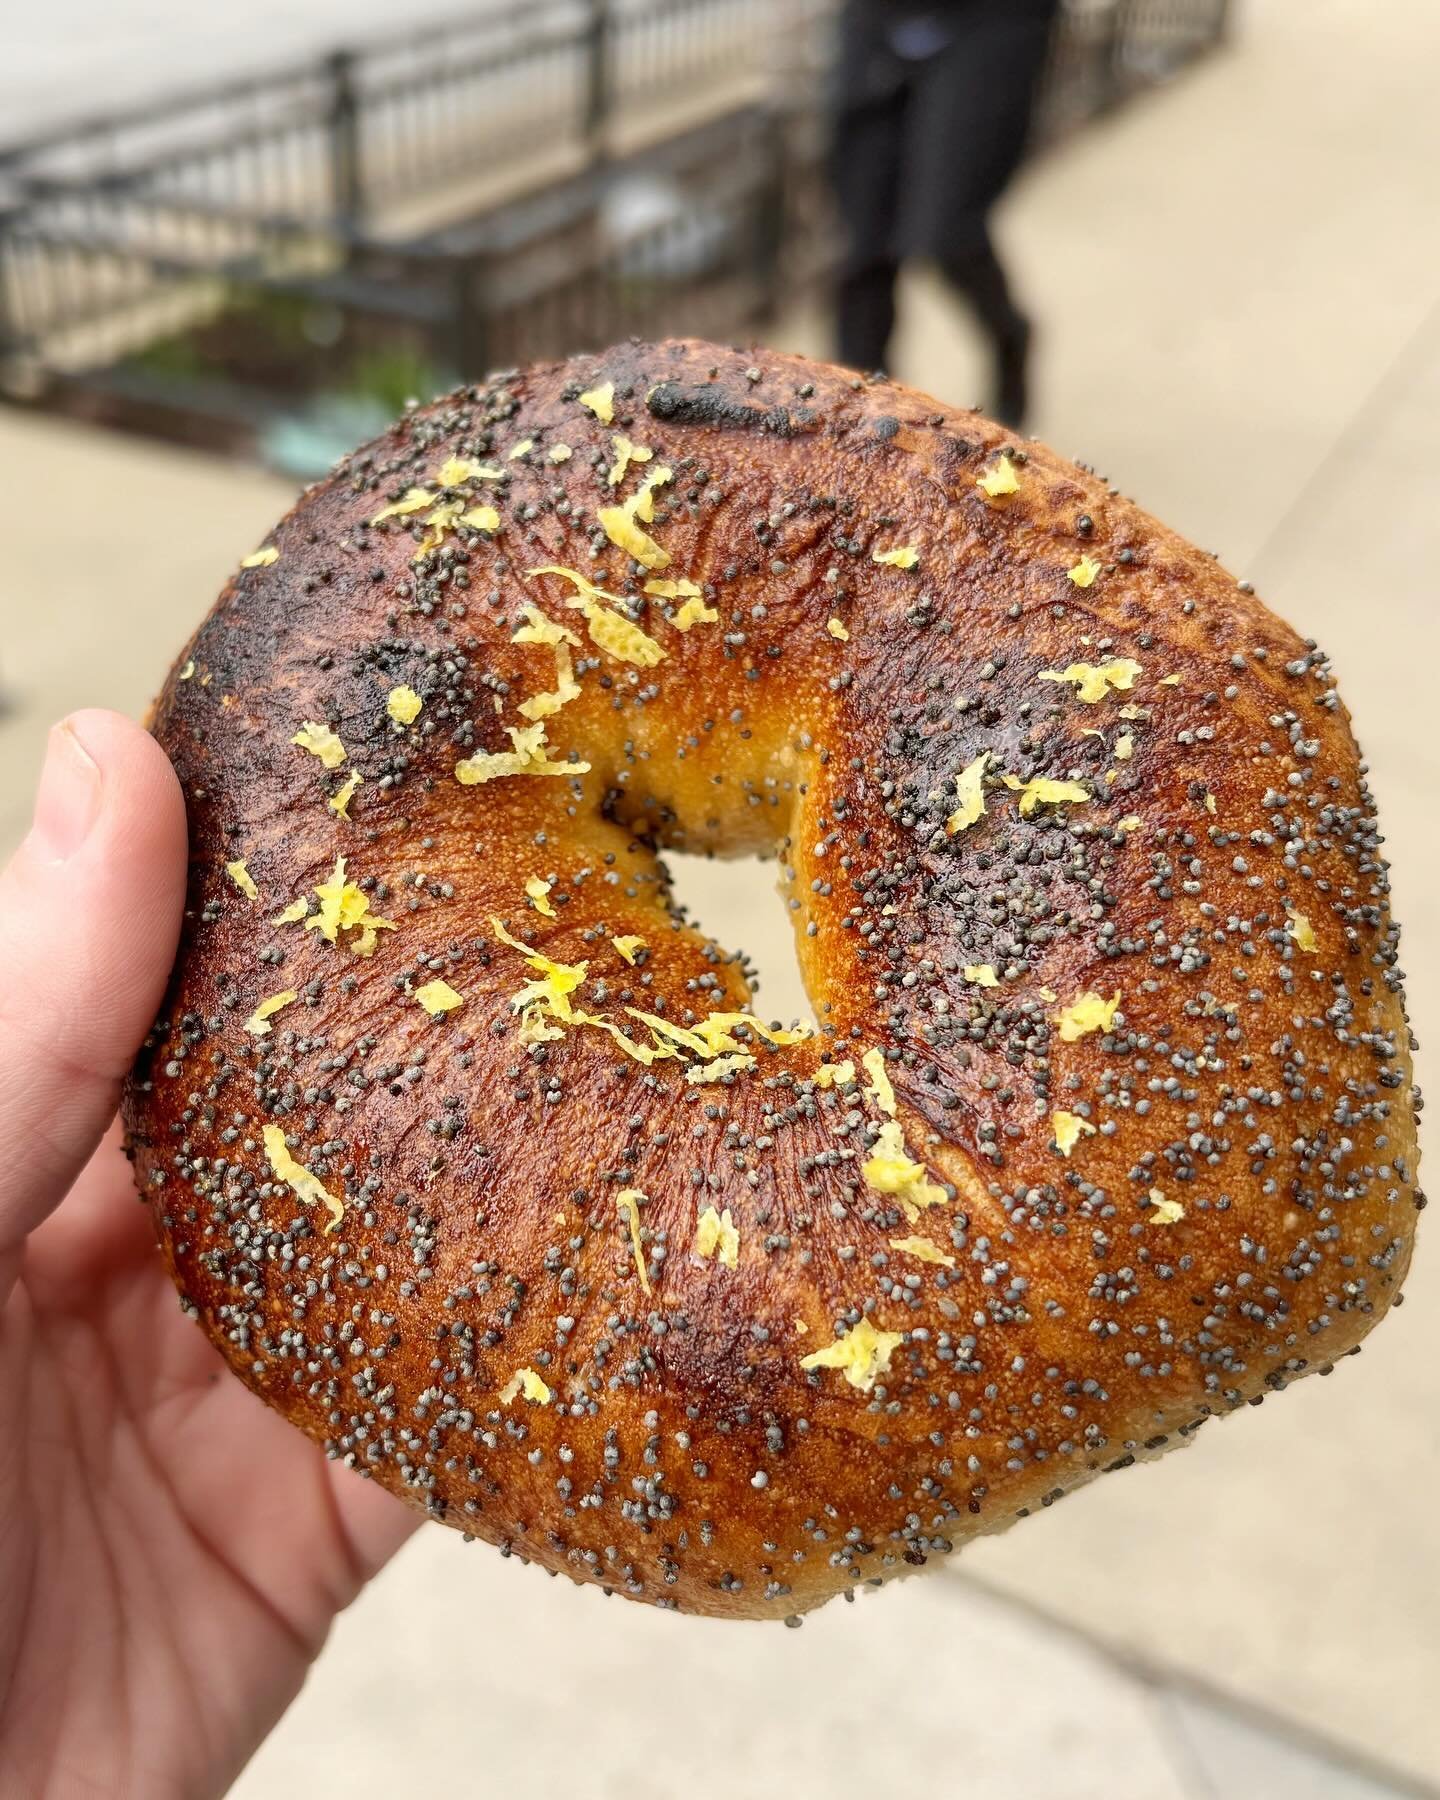 BOTW! Lemon Poppy Seed! 🍋🥯 Lemon zest and poppy seeds in the dough, and topped with a candied poppy seed topping. Try it with our Blueberry Cream Cheese!